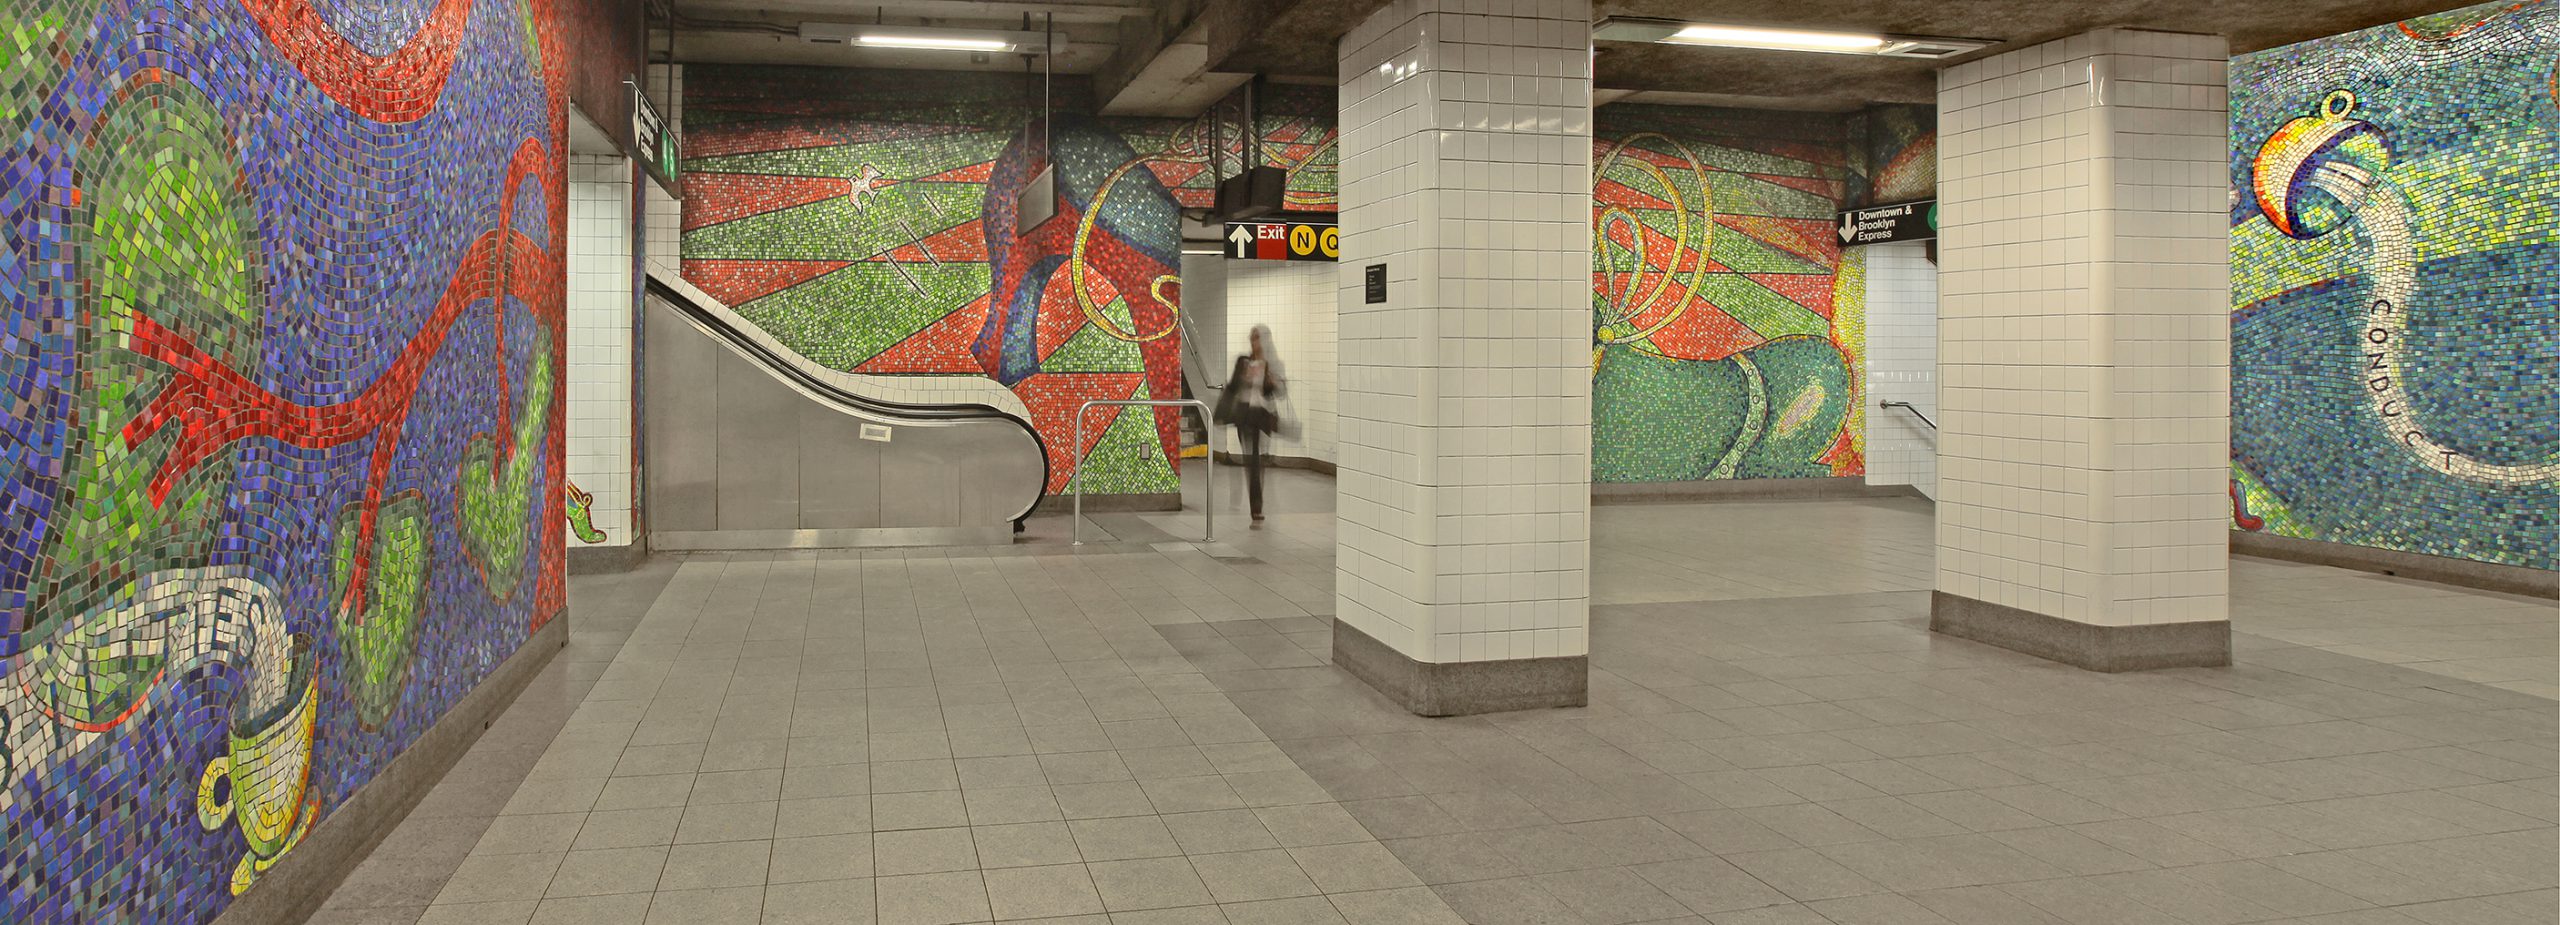 Glass Mosaic Mural by Elizabeth Murray at 59th St Subway Station. Title: "Blooming" 1996